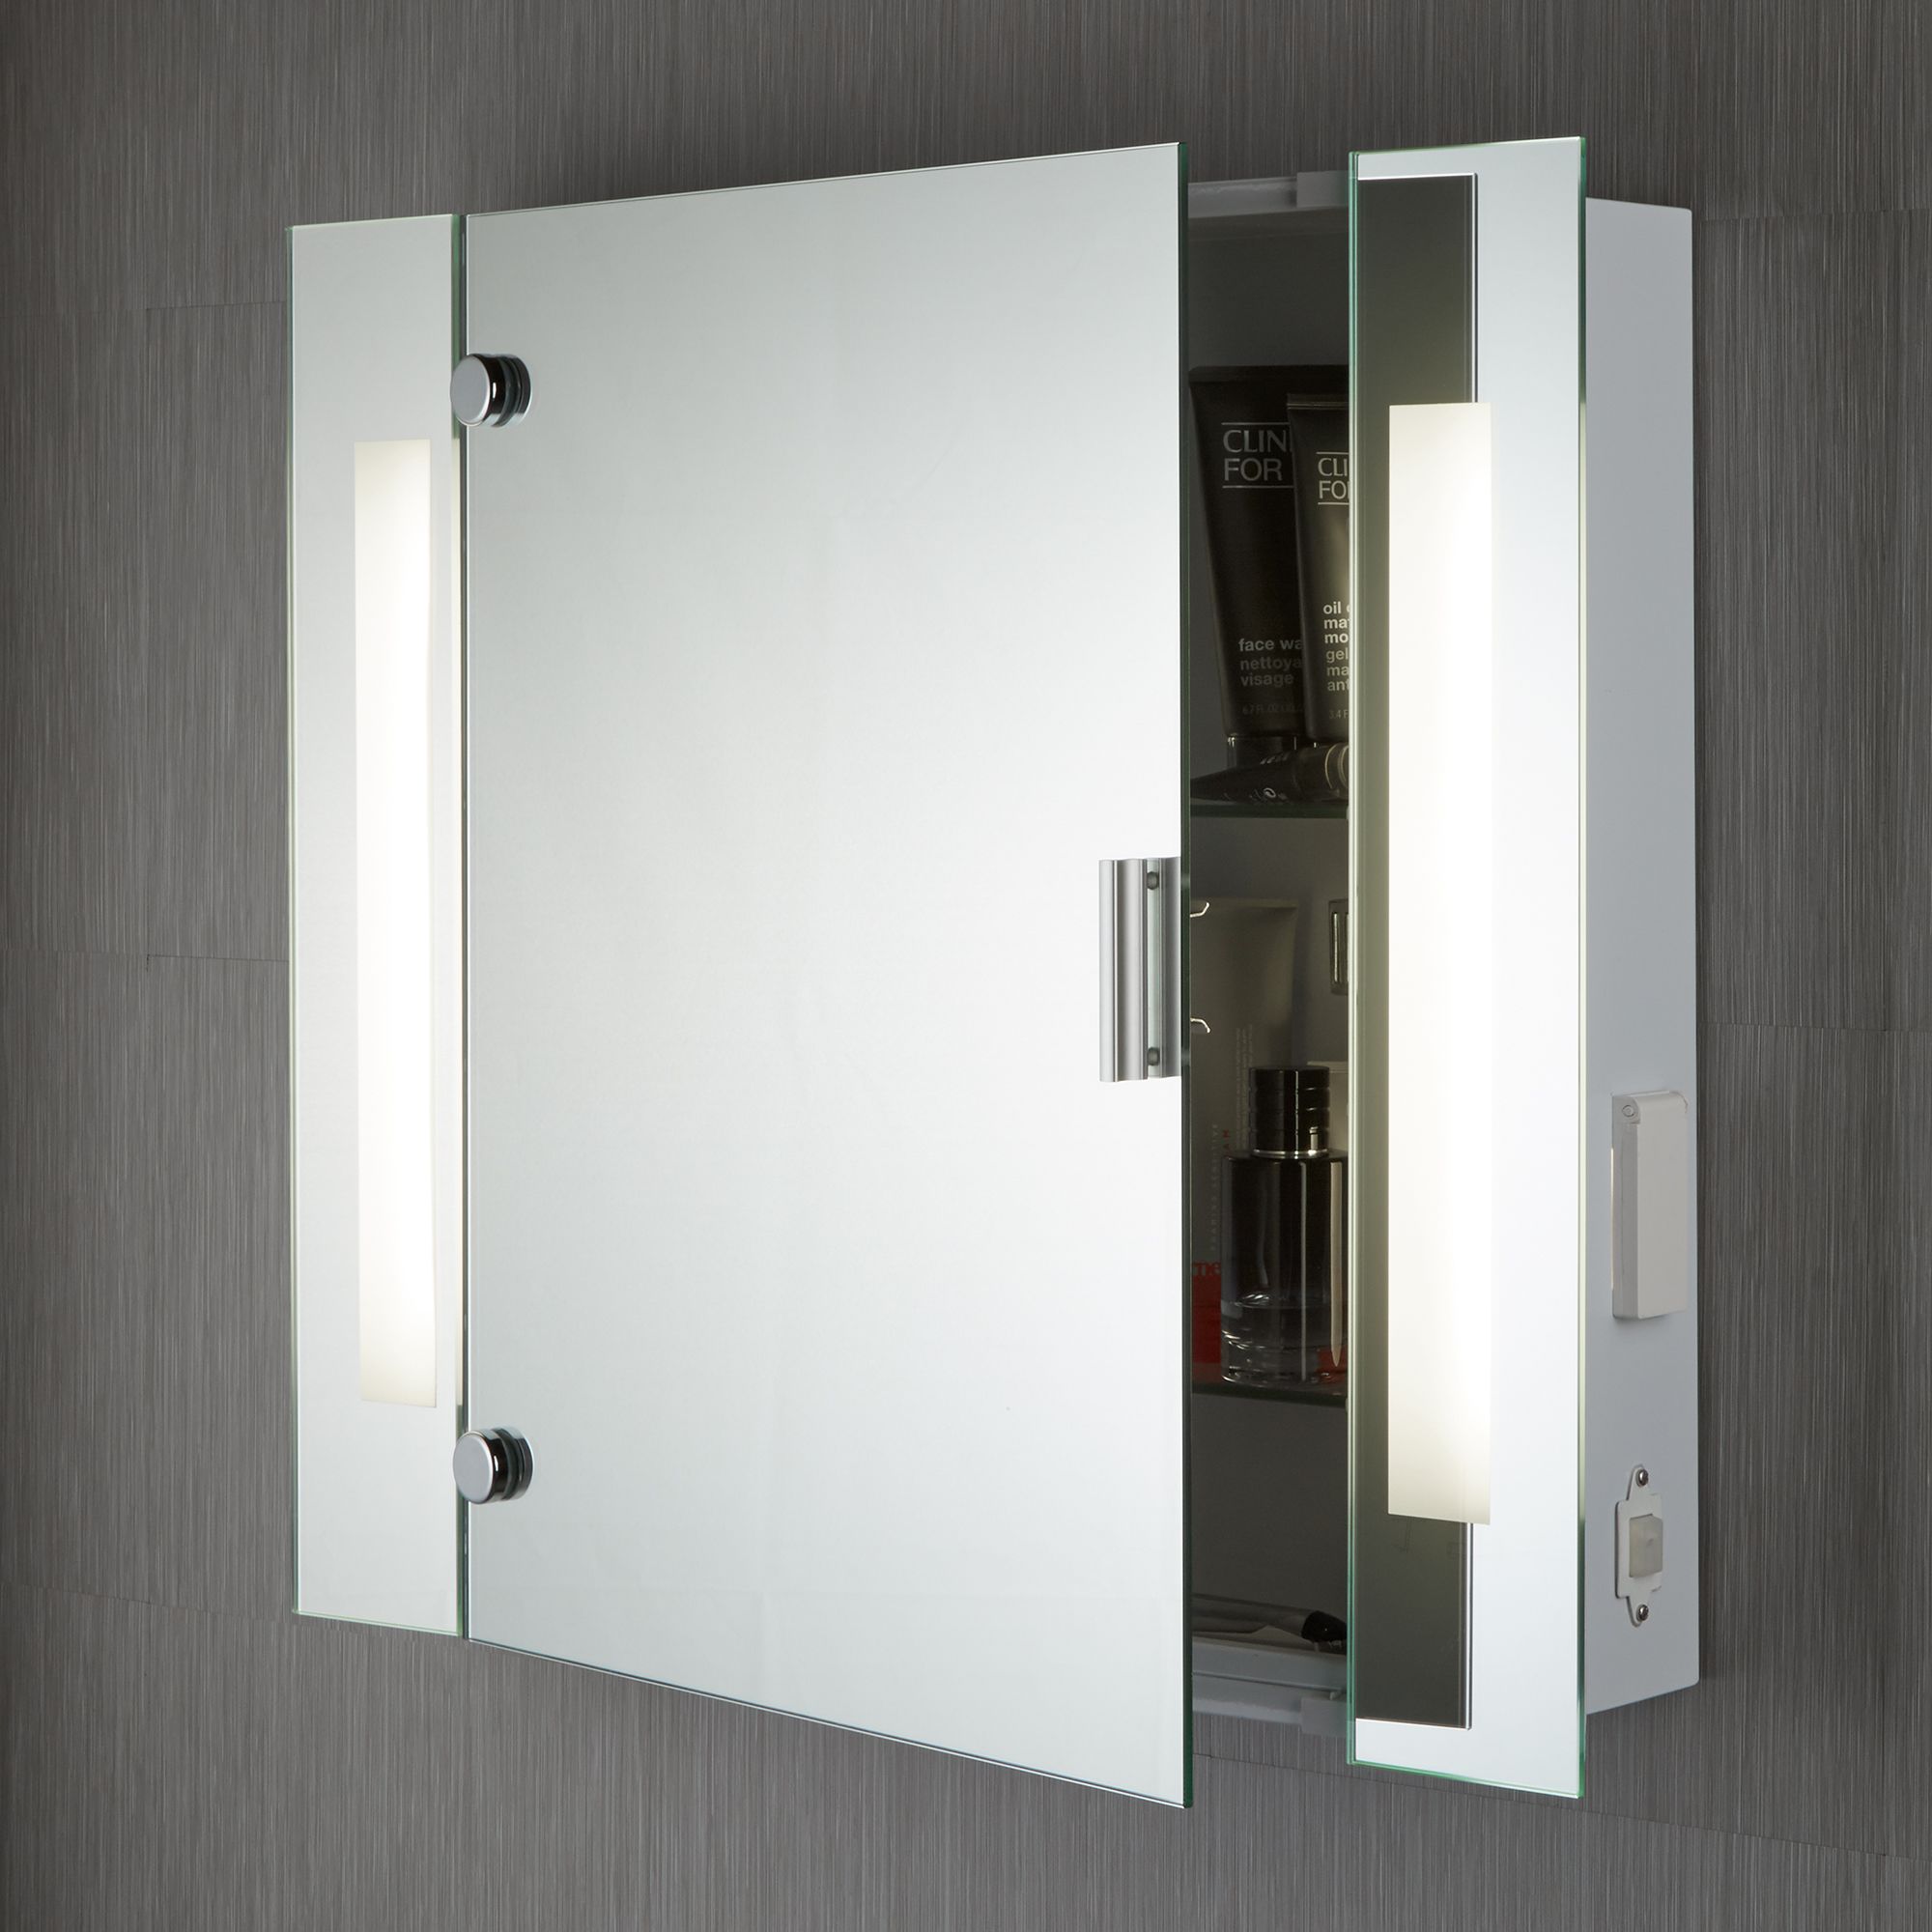 Ip44 Illuminated Bathroom Mirror Cabinet With Shaver Socket Switched